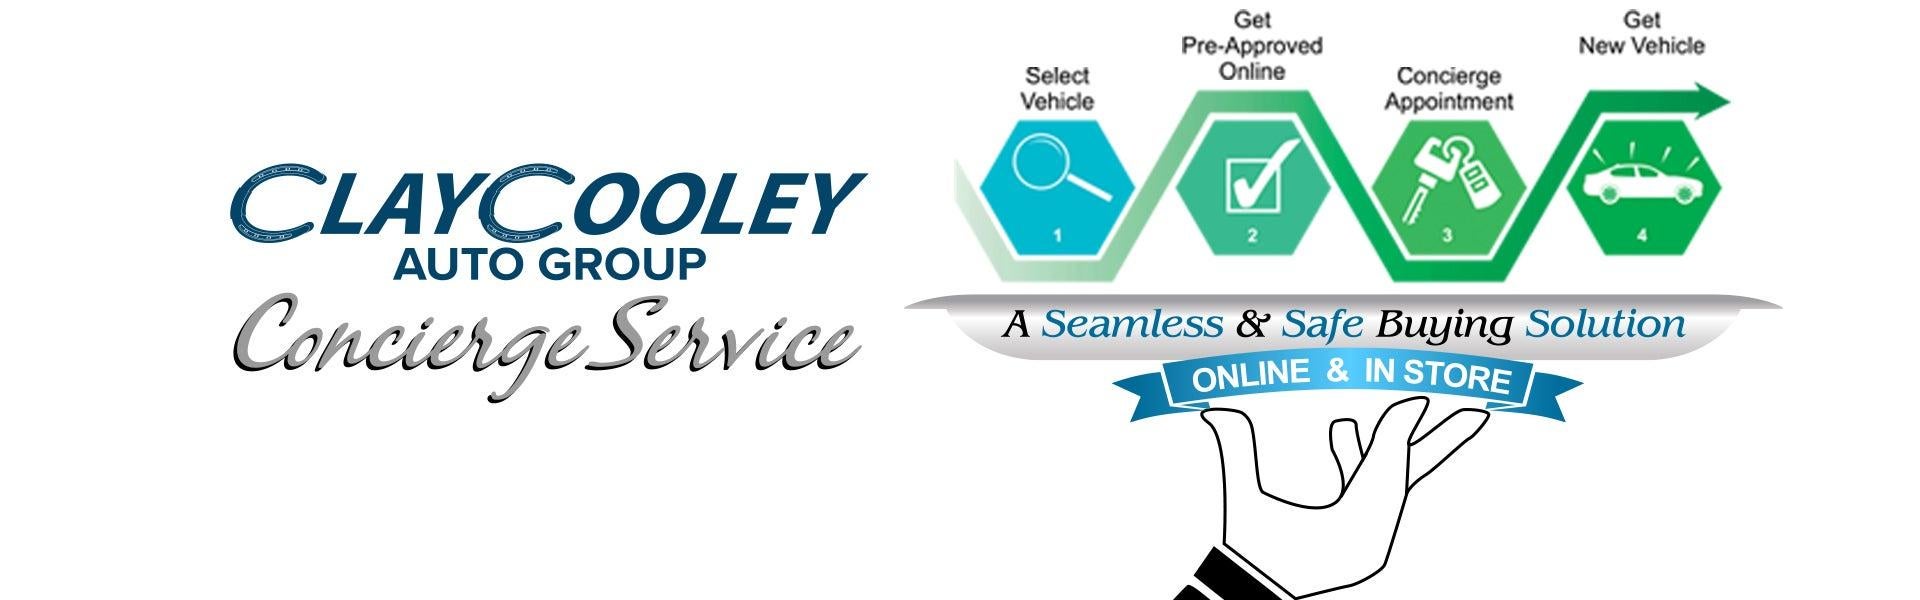 Clay Cooley Chevrolet of Irving | Concierge Service